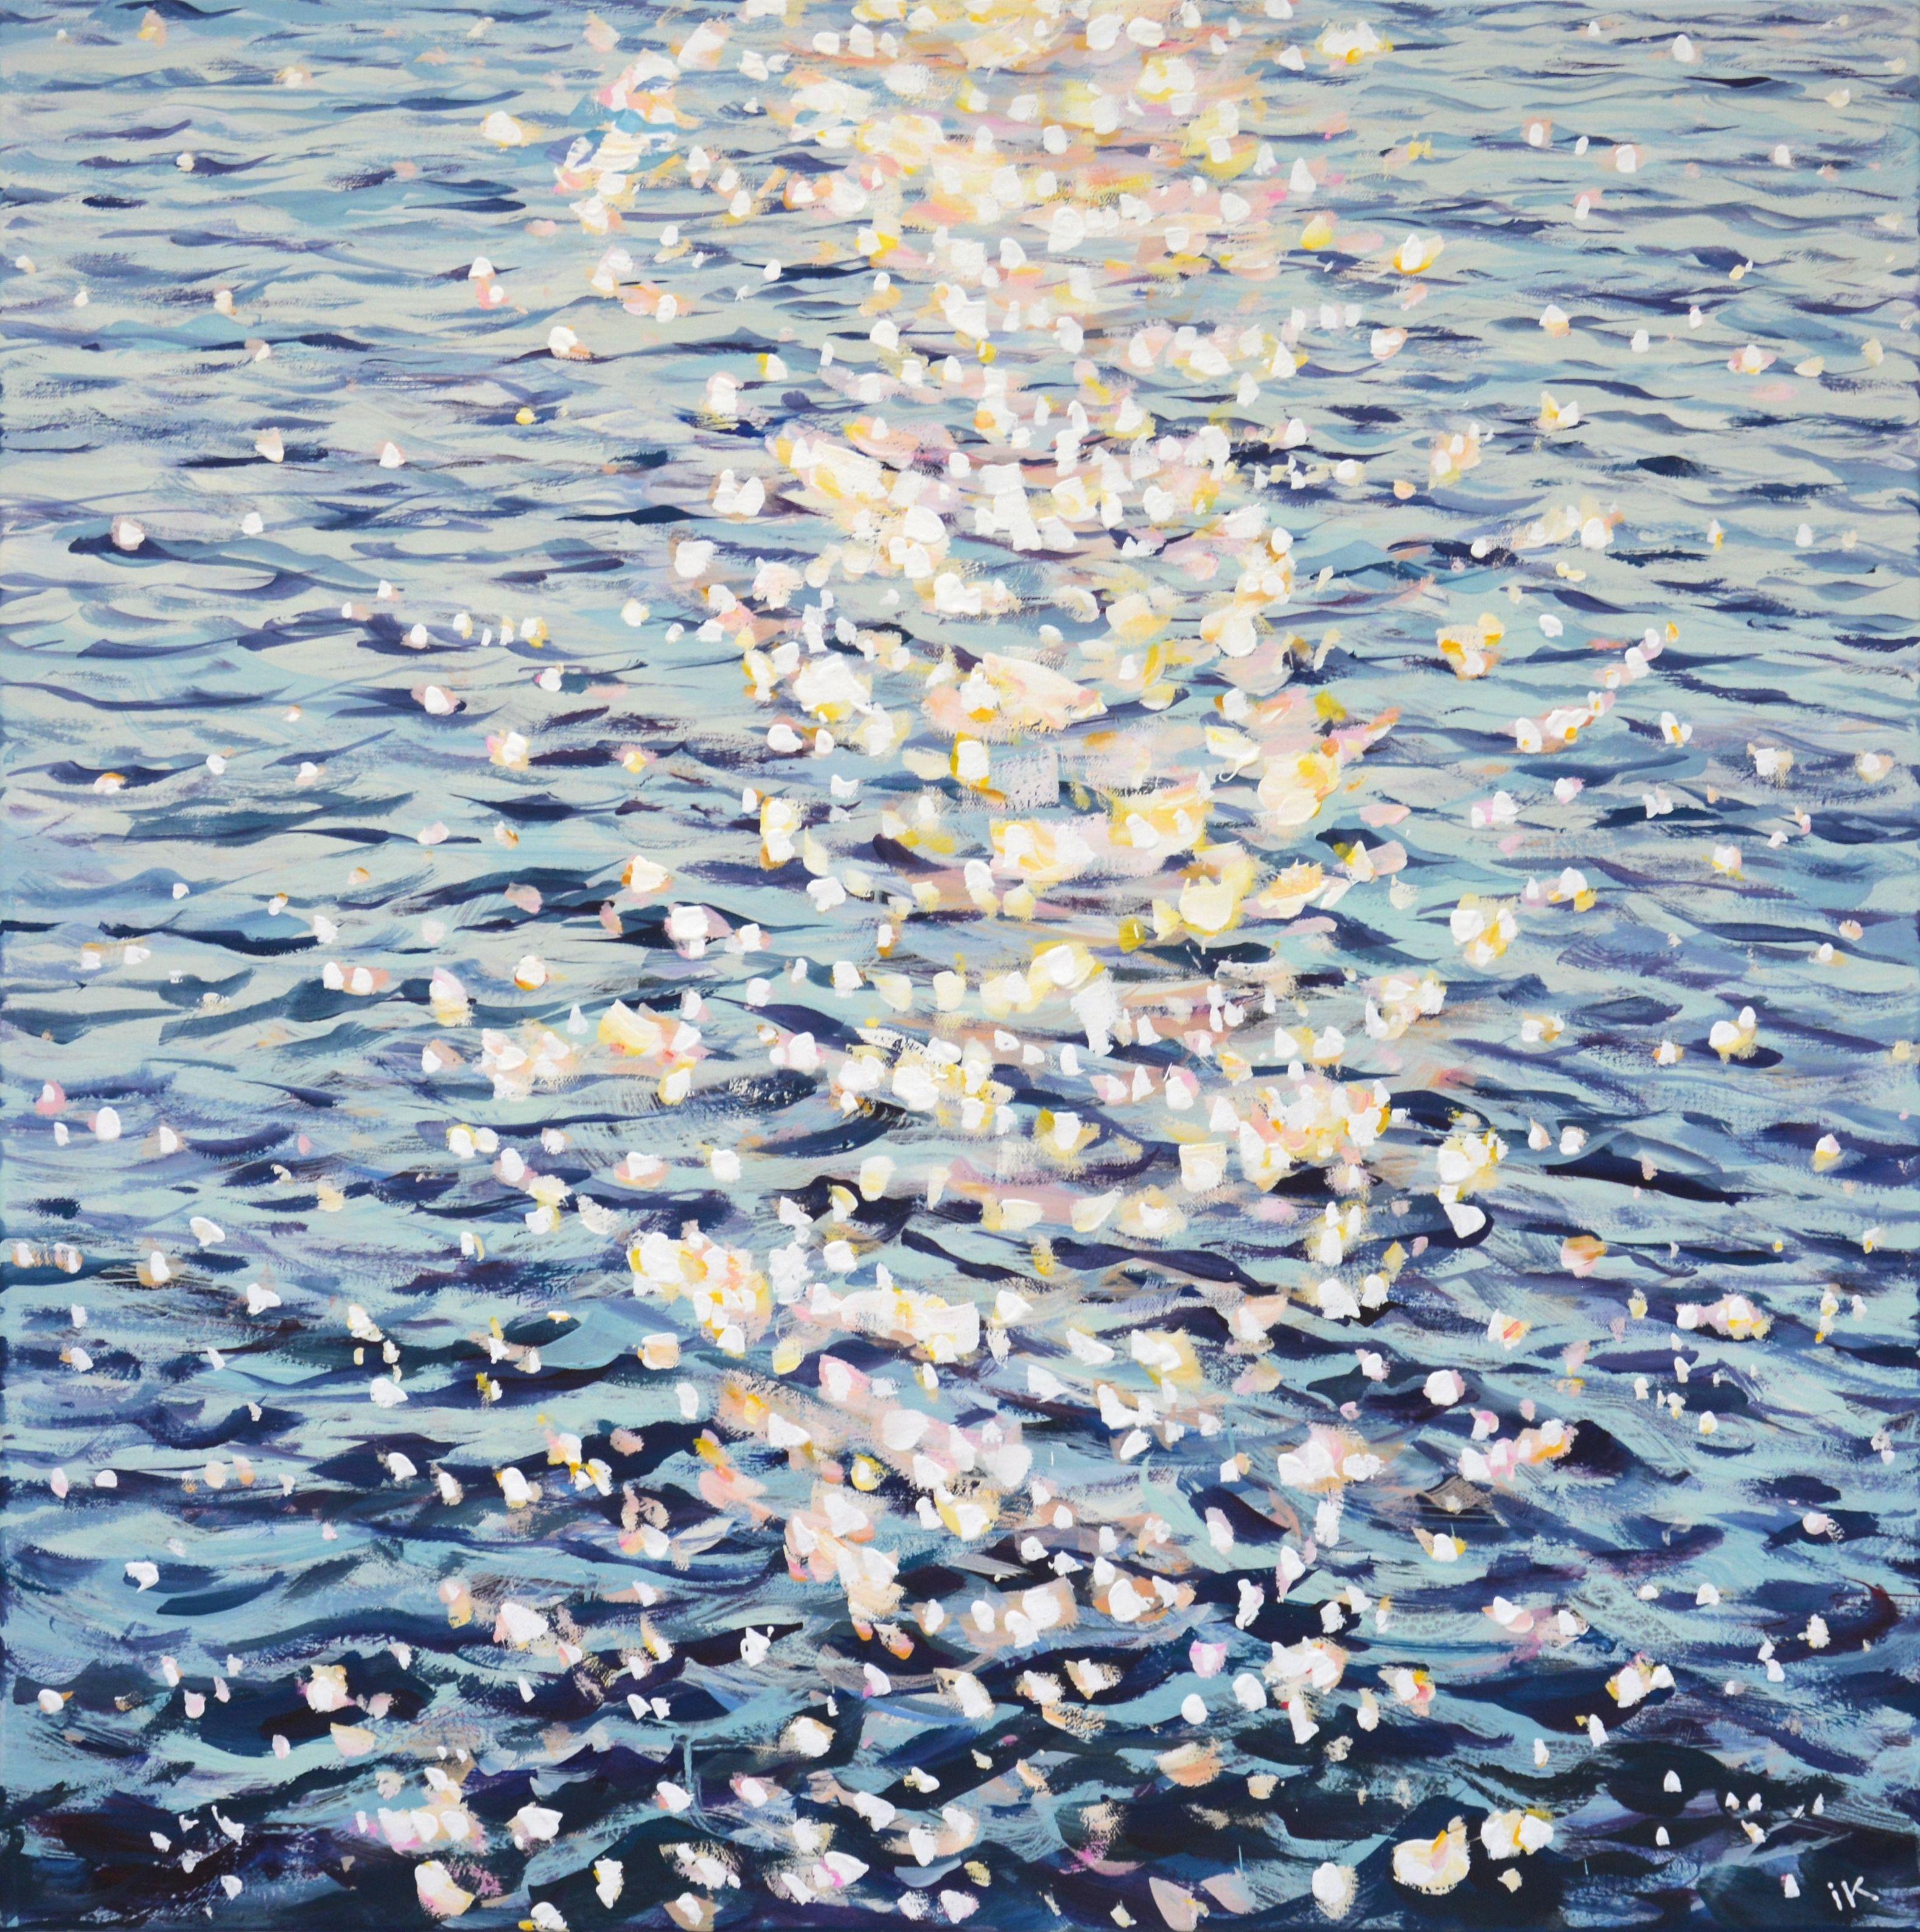 light. Water. The shine of the ocean, small waves, the glare of the sun on the water create an atmosphere of relaxation and romance. Made in the style of realism. Part of a permanent series of seascapes. The picture is of high quality, the colors